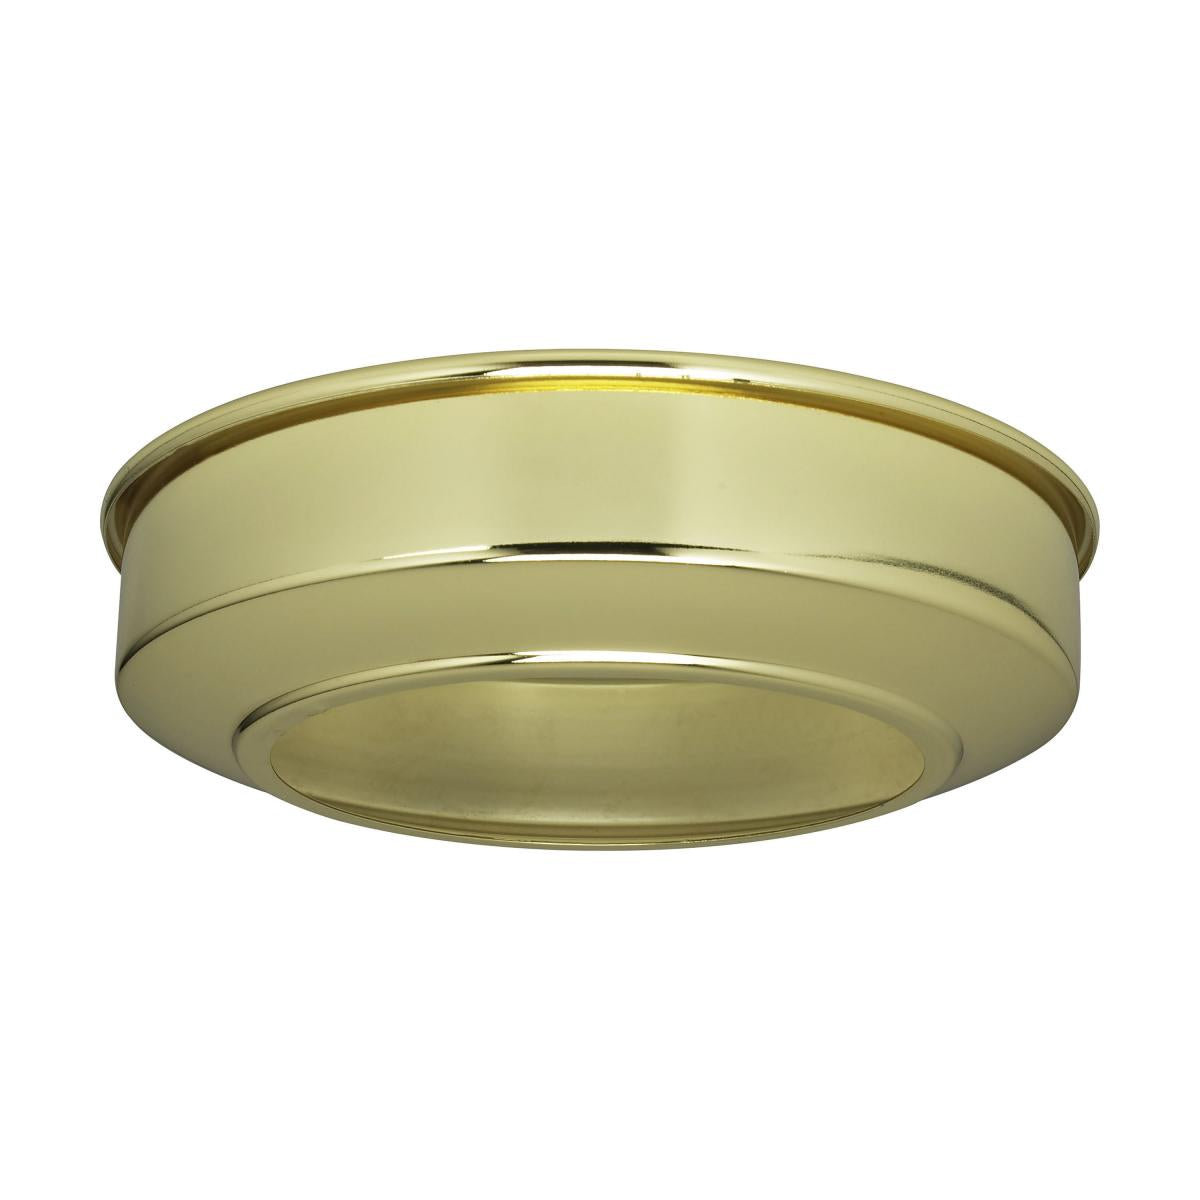 Satco 90-242 Canopy Extension Brass Finish 5-3/4" Diameter Fits 5" Canopy 1-1/2" Extension